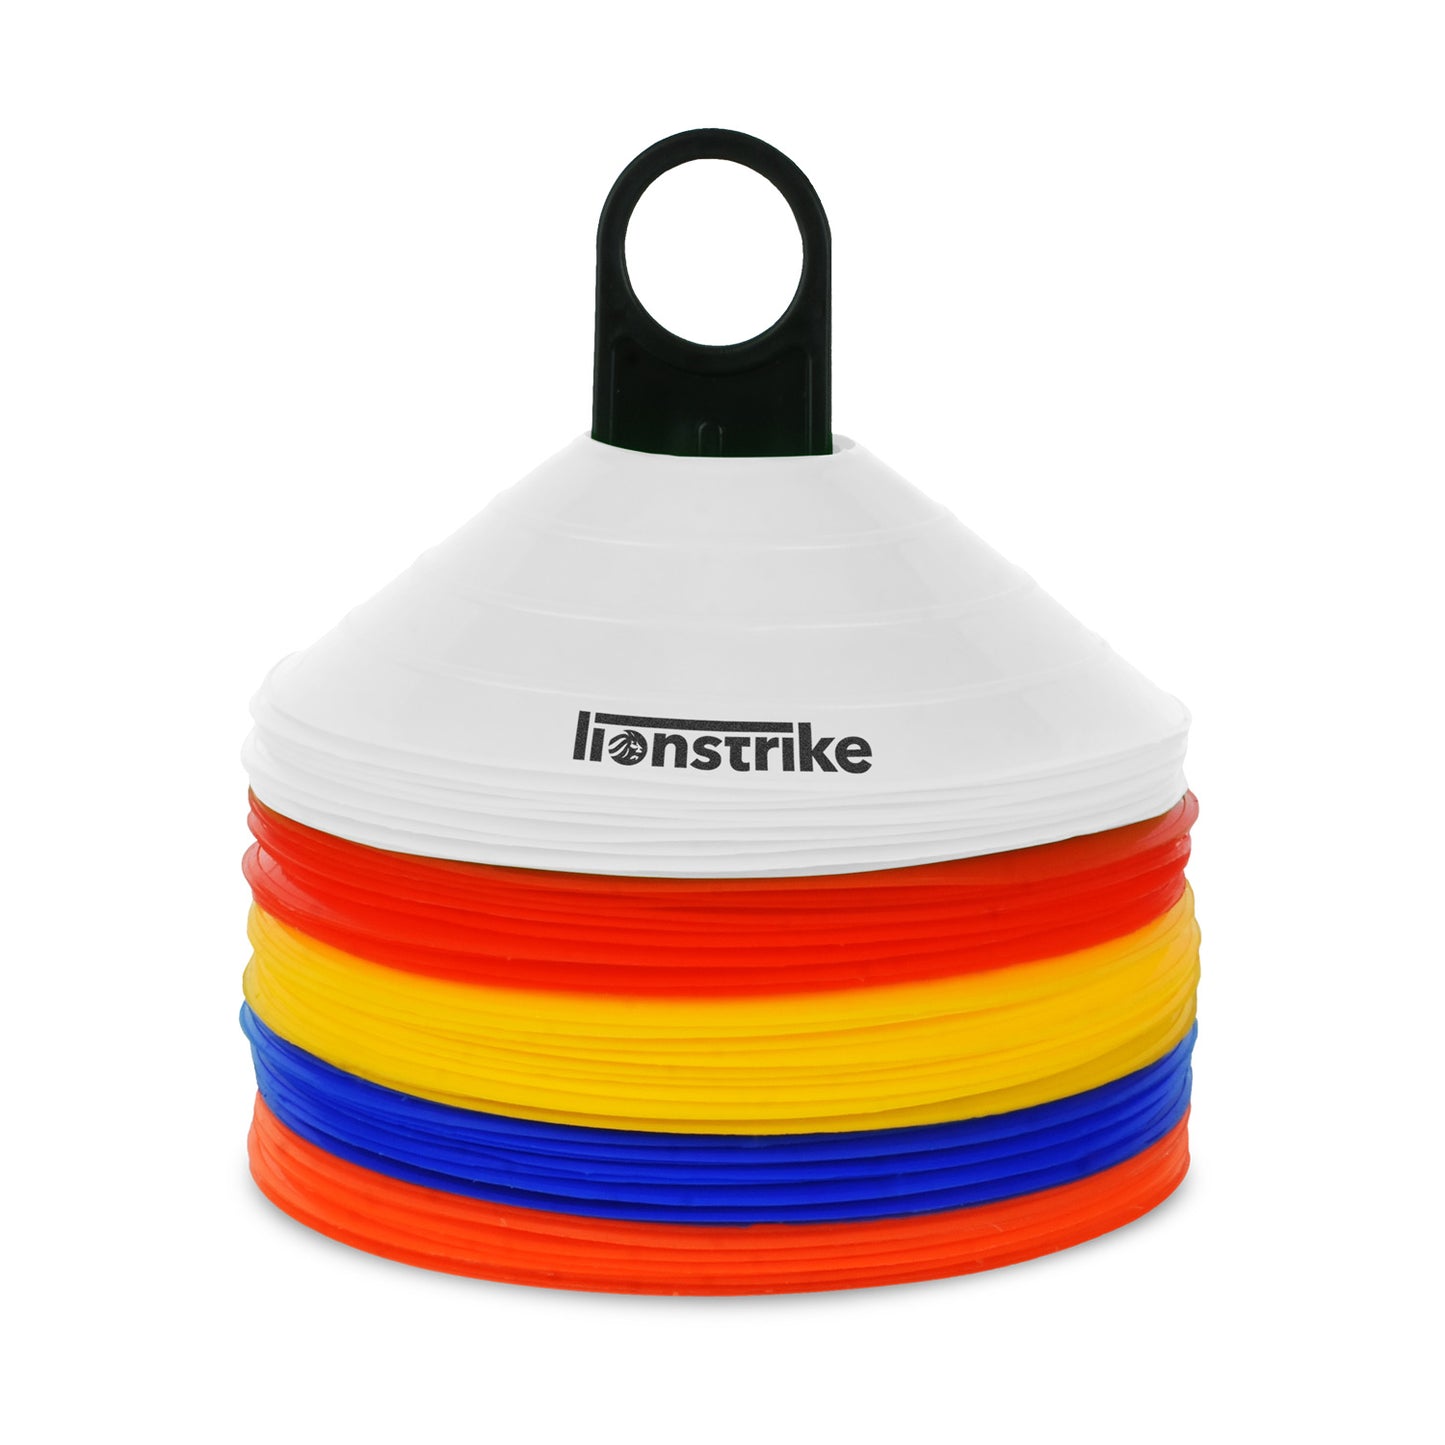 Lionstrike Football / Sports Cones Set – made from 100% recycled plastic